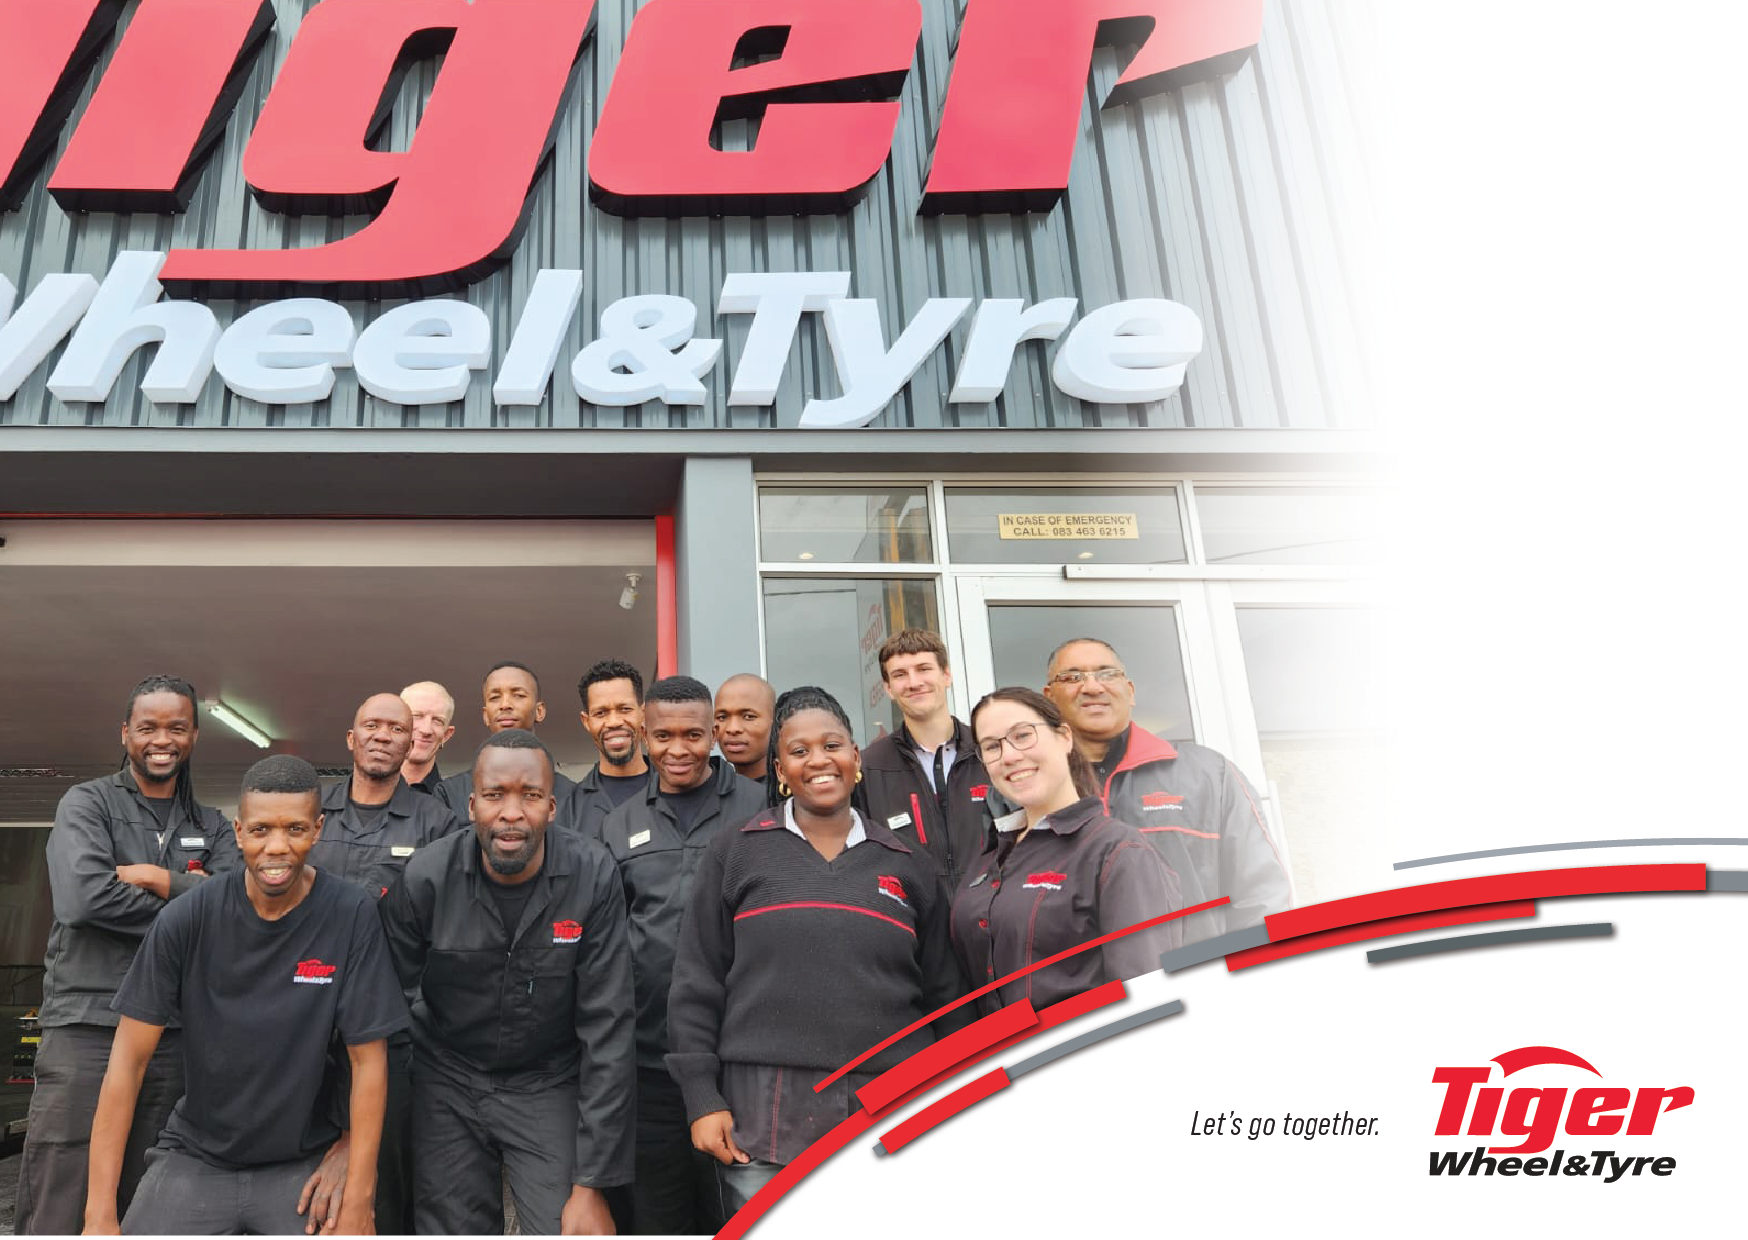 Coastal city becomes home to second Tiger Wheel & Tyre Fitment Centre